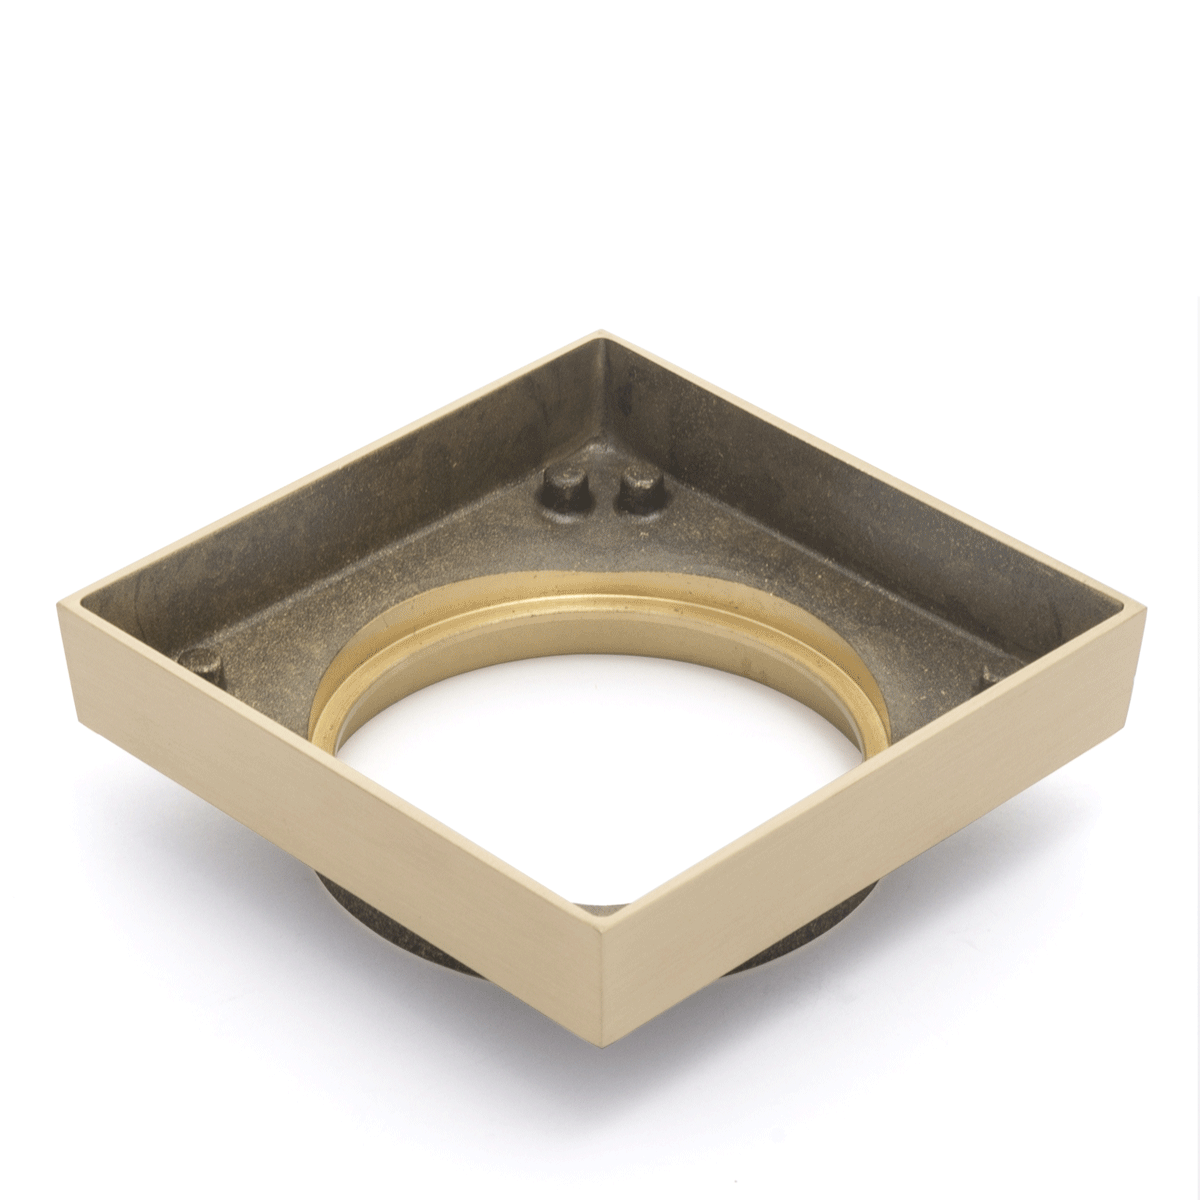 Premium Floor Drain with Tile Insert - Floor Waste | 90mm Outlet, Brushed Brass (Gold) |